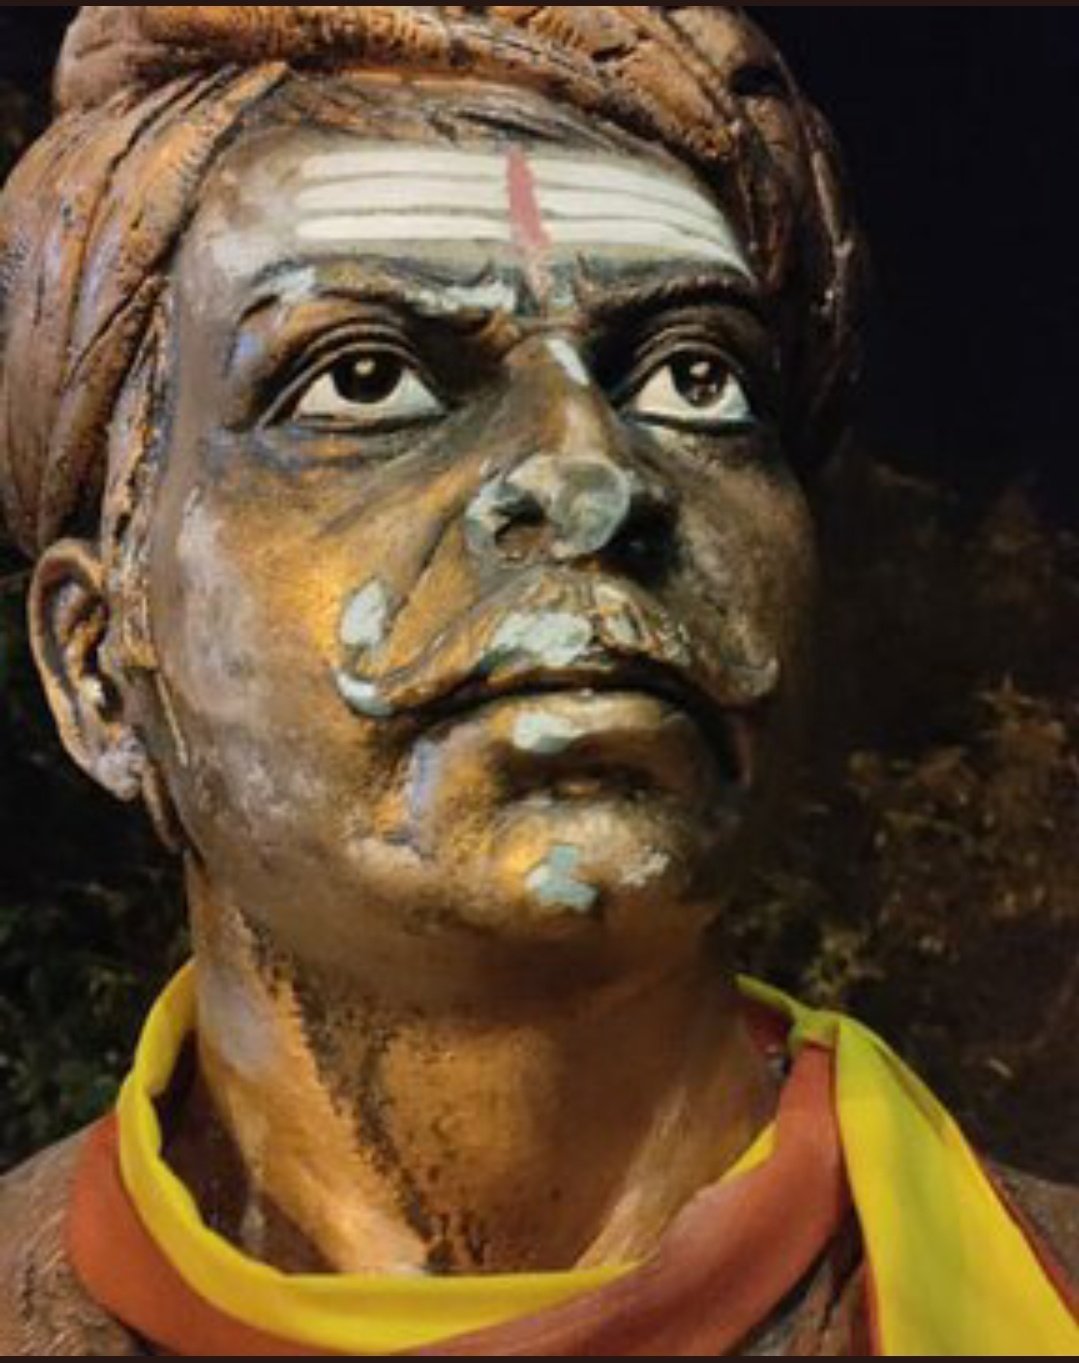 vandals targeted freedom fighter Sangolli Rayanna's statue in Belagavi 